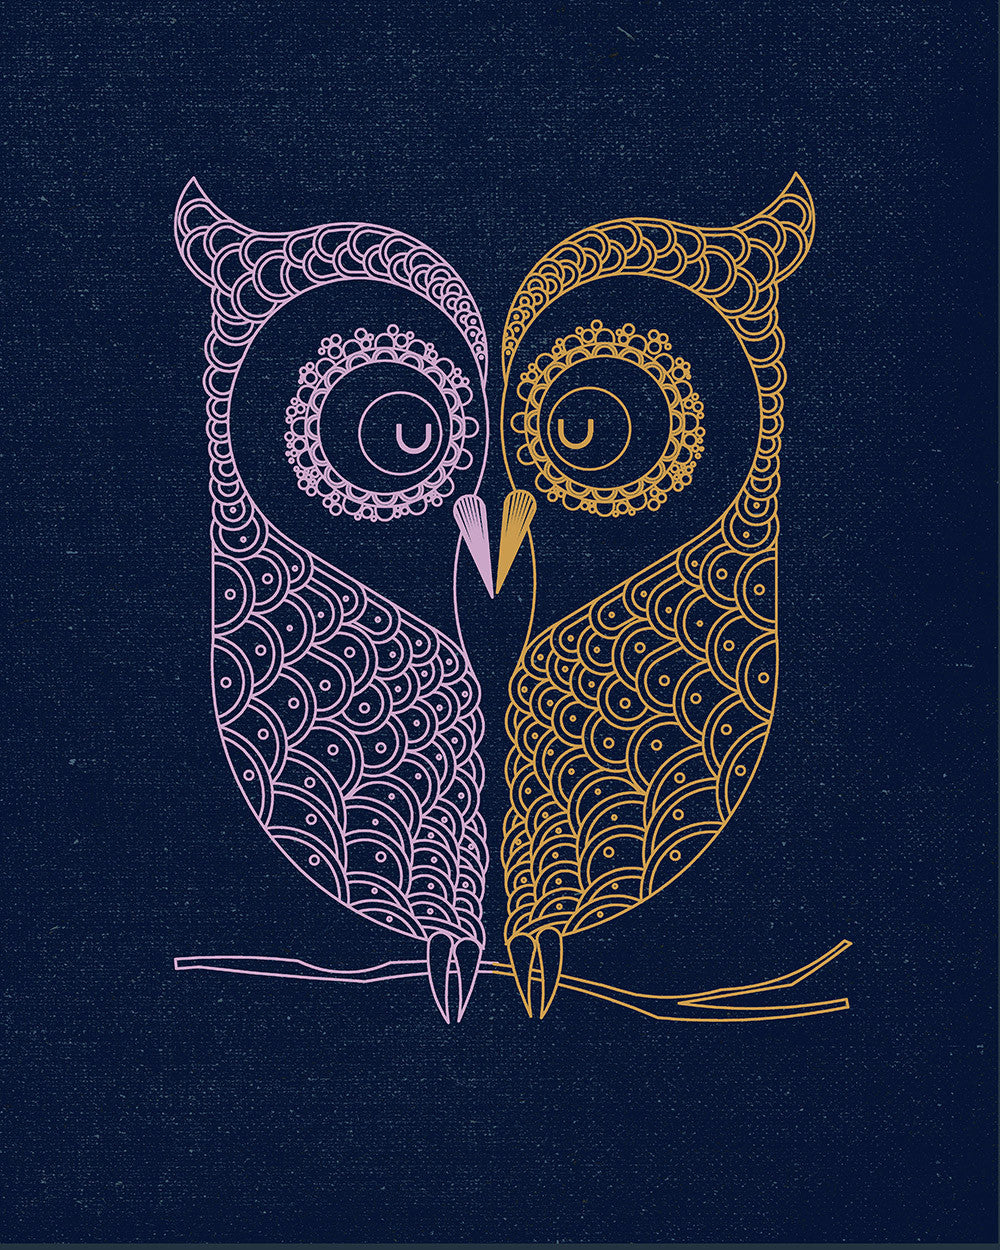 Best Gift for Valentine's Day - Owl Love - Art Prints by Sina ...